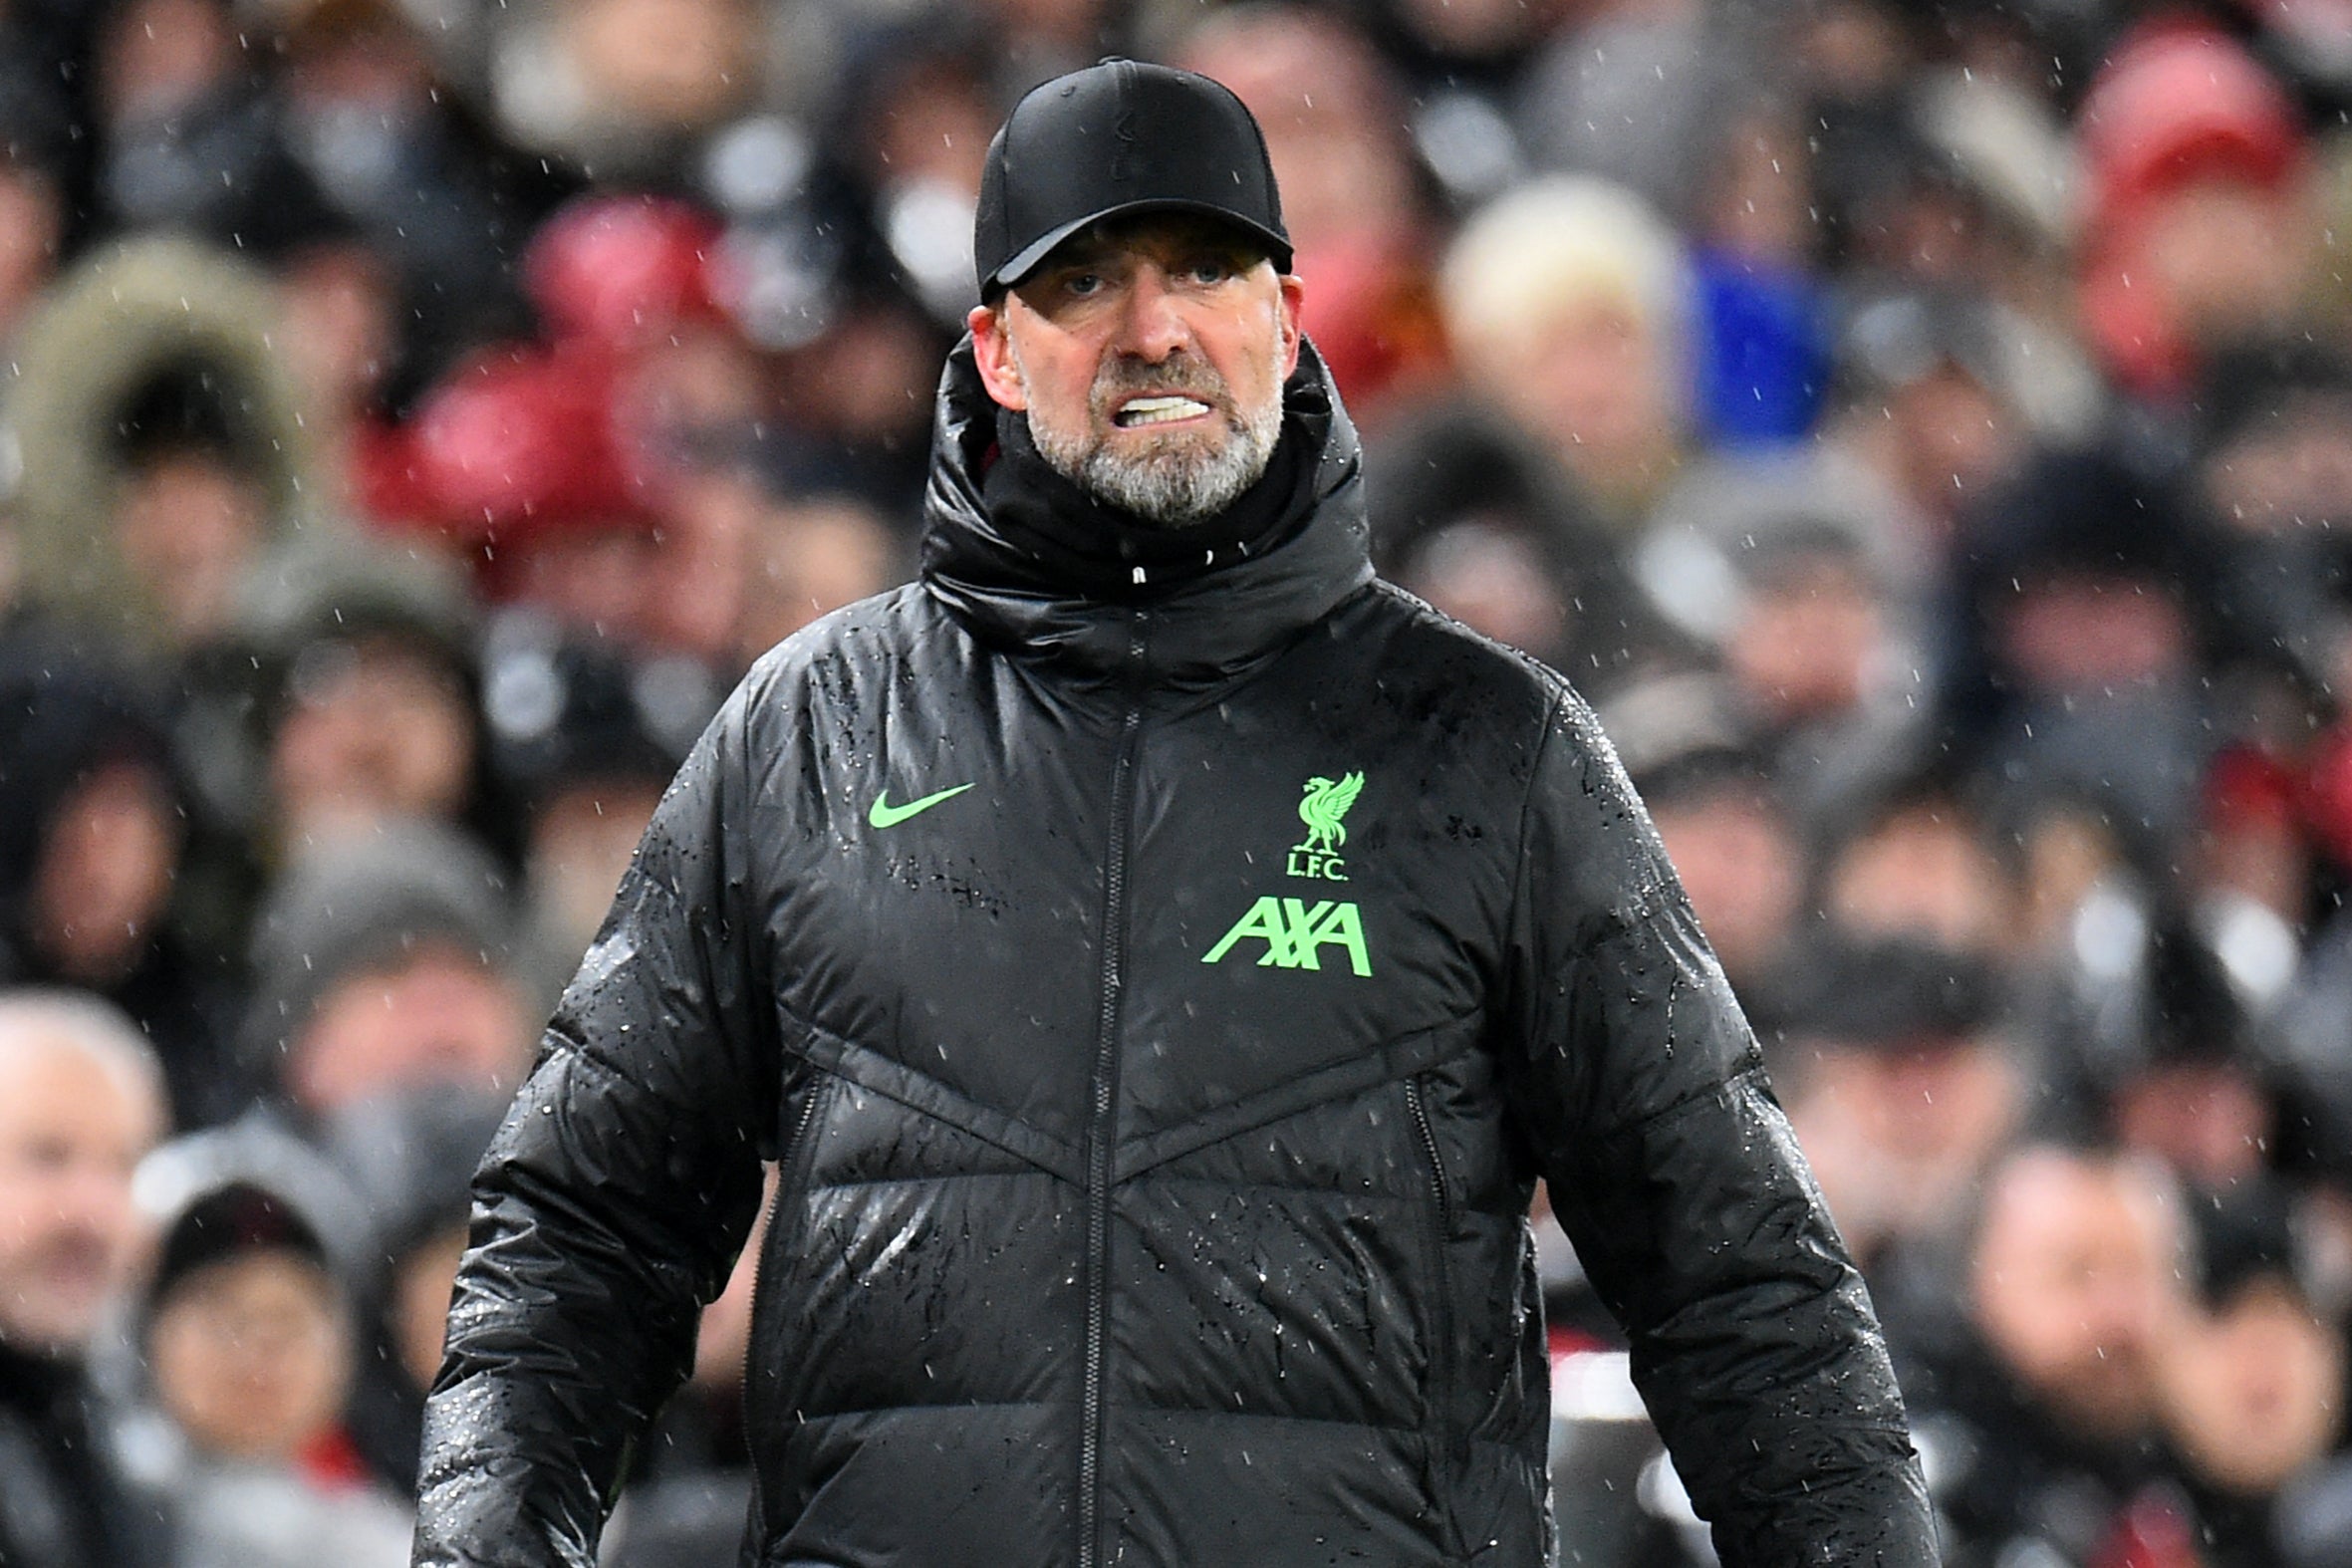 Jurgen Klopp faces some team decisions for the FA Cup tie against Arsenal